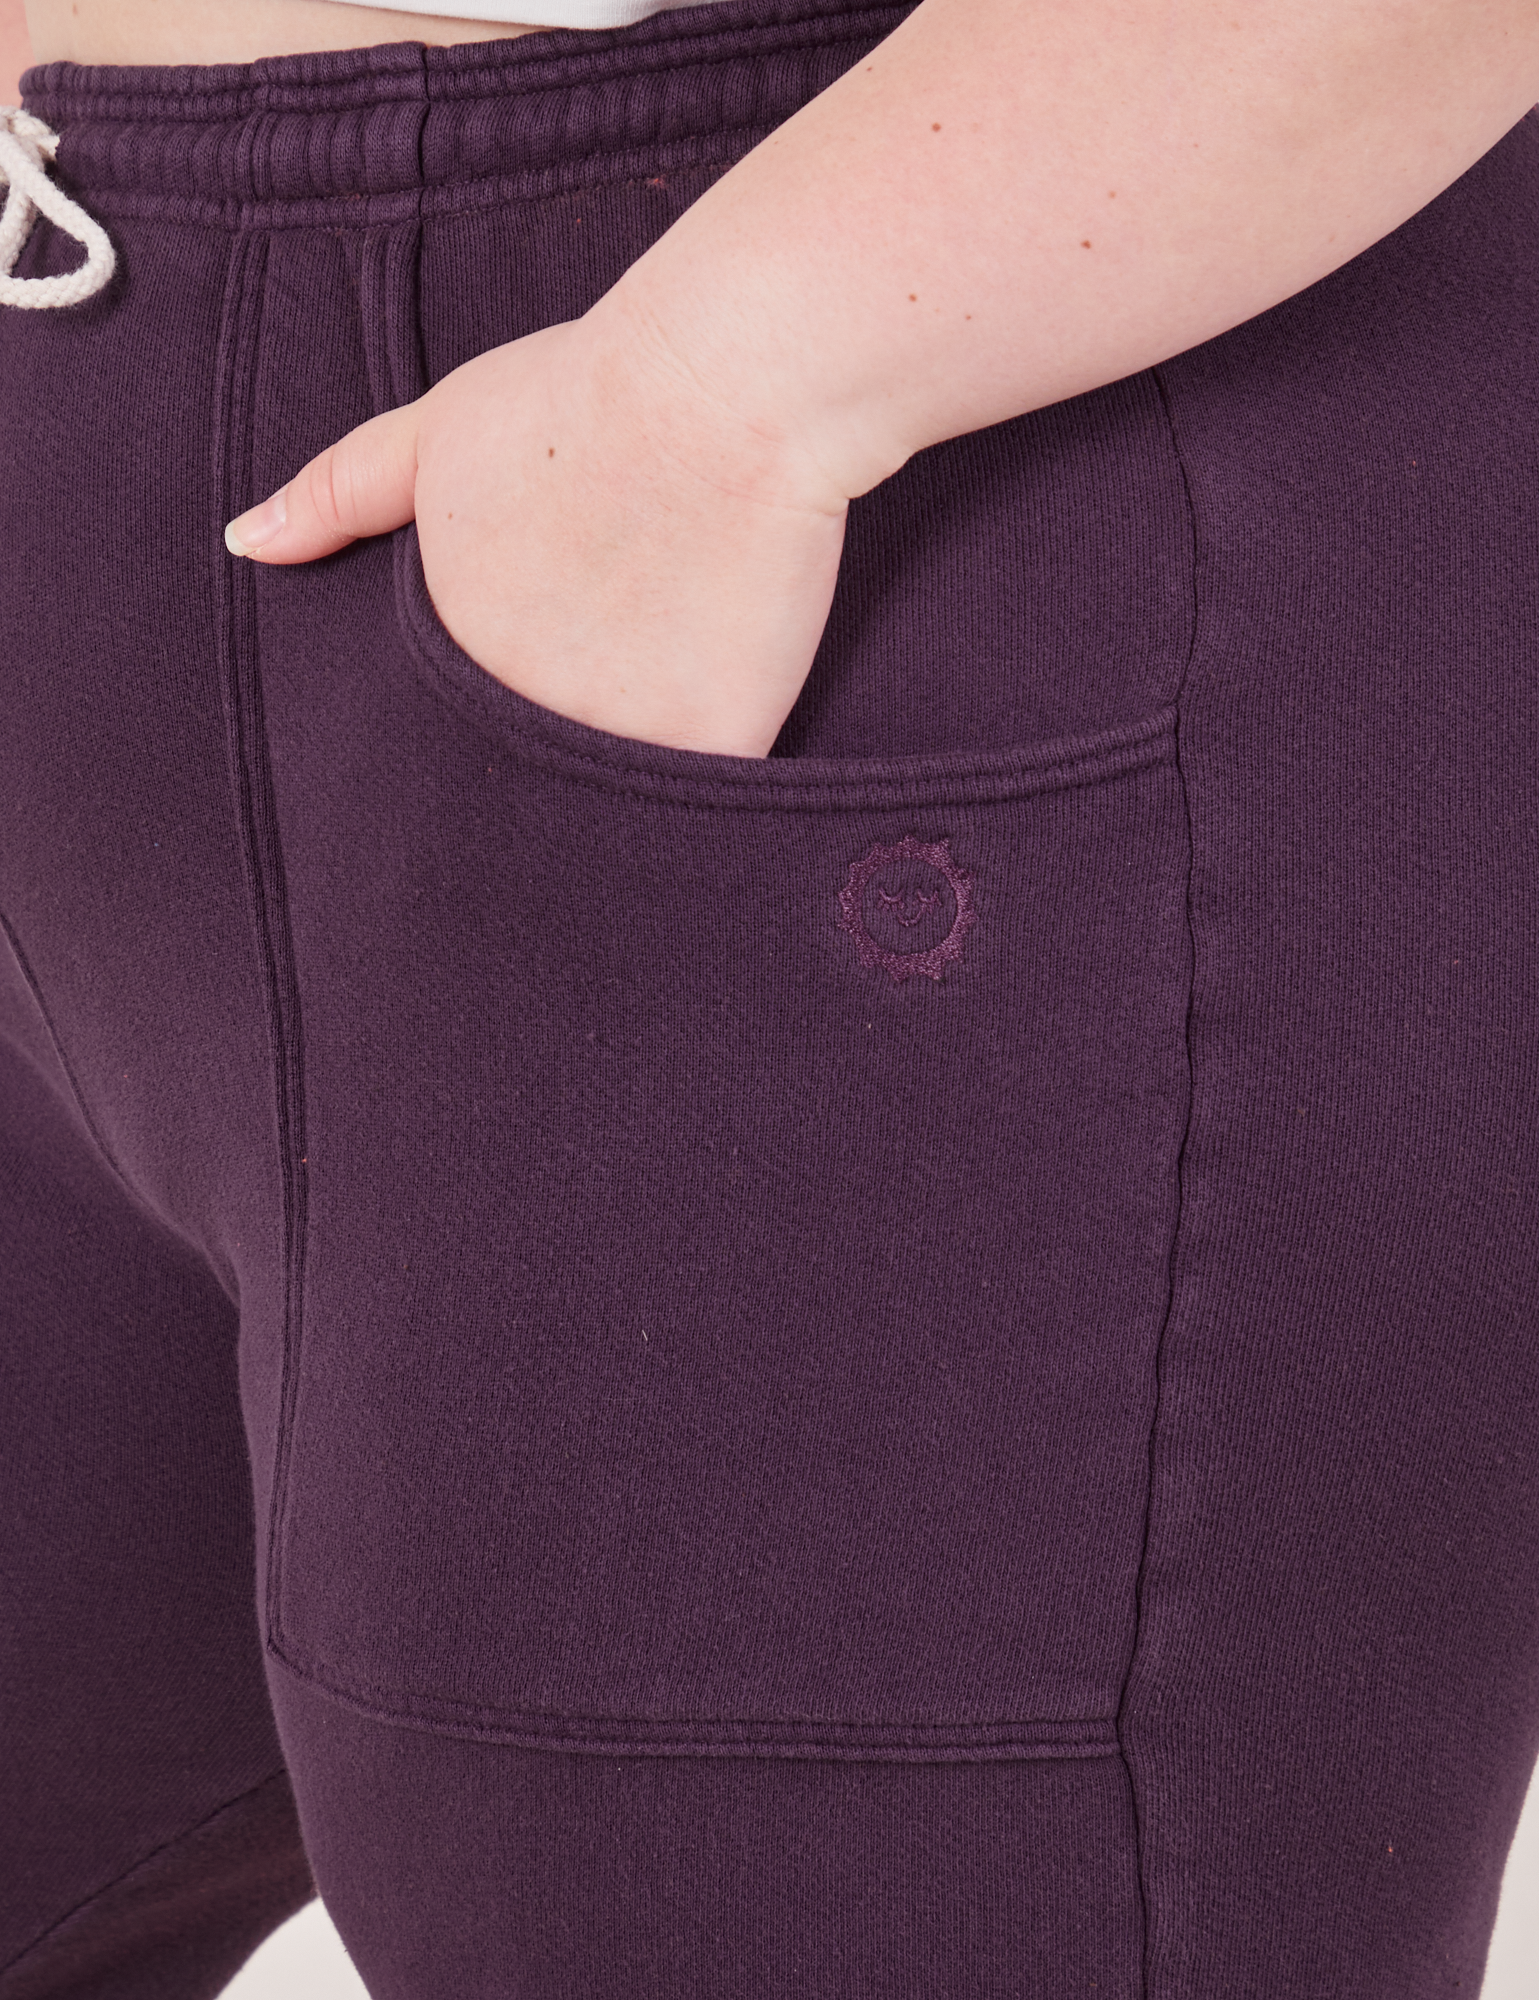 Rolled Cuff Sweat Pants in Nebula Purple front pocket close up. Ashley has her hand in the pocket.